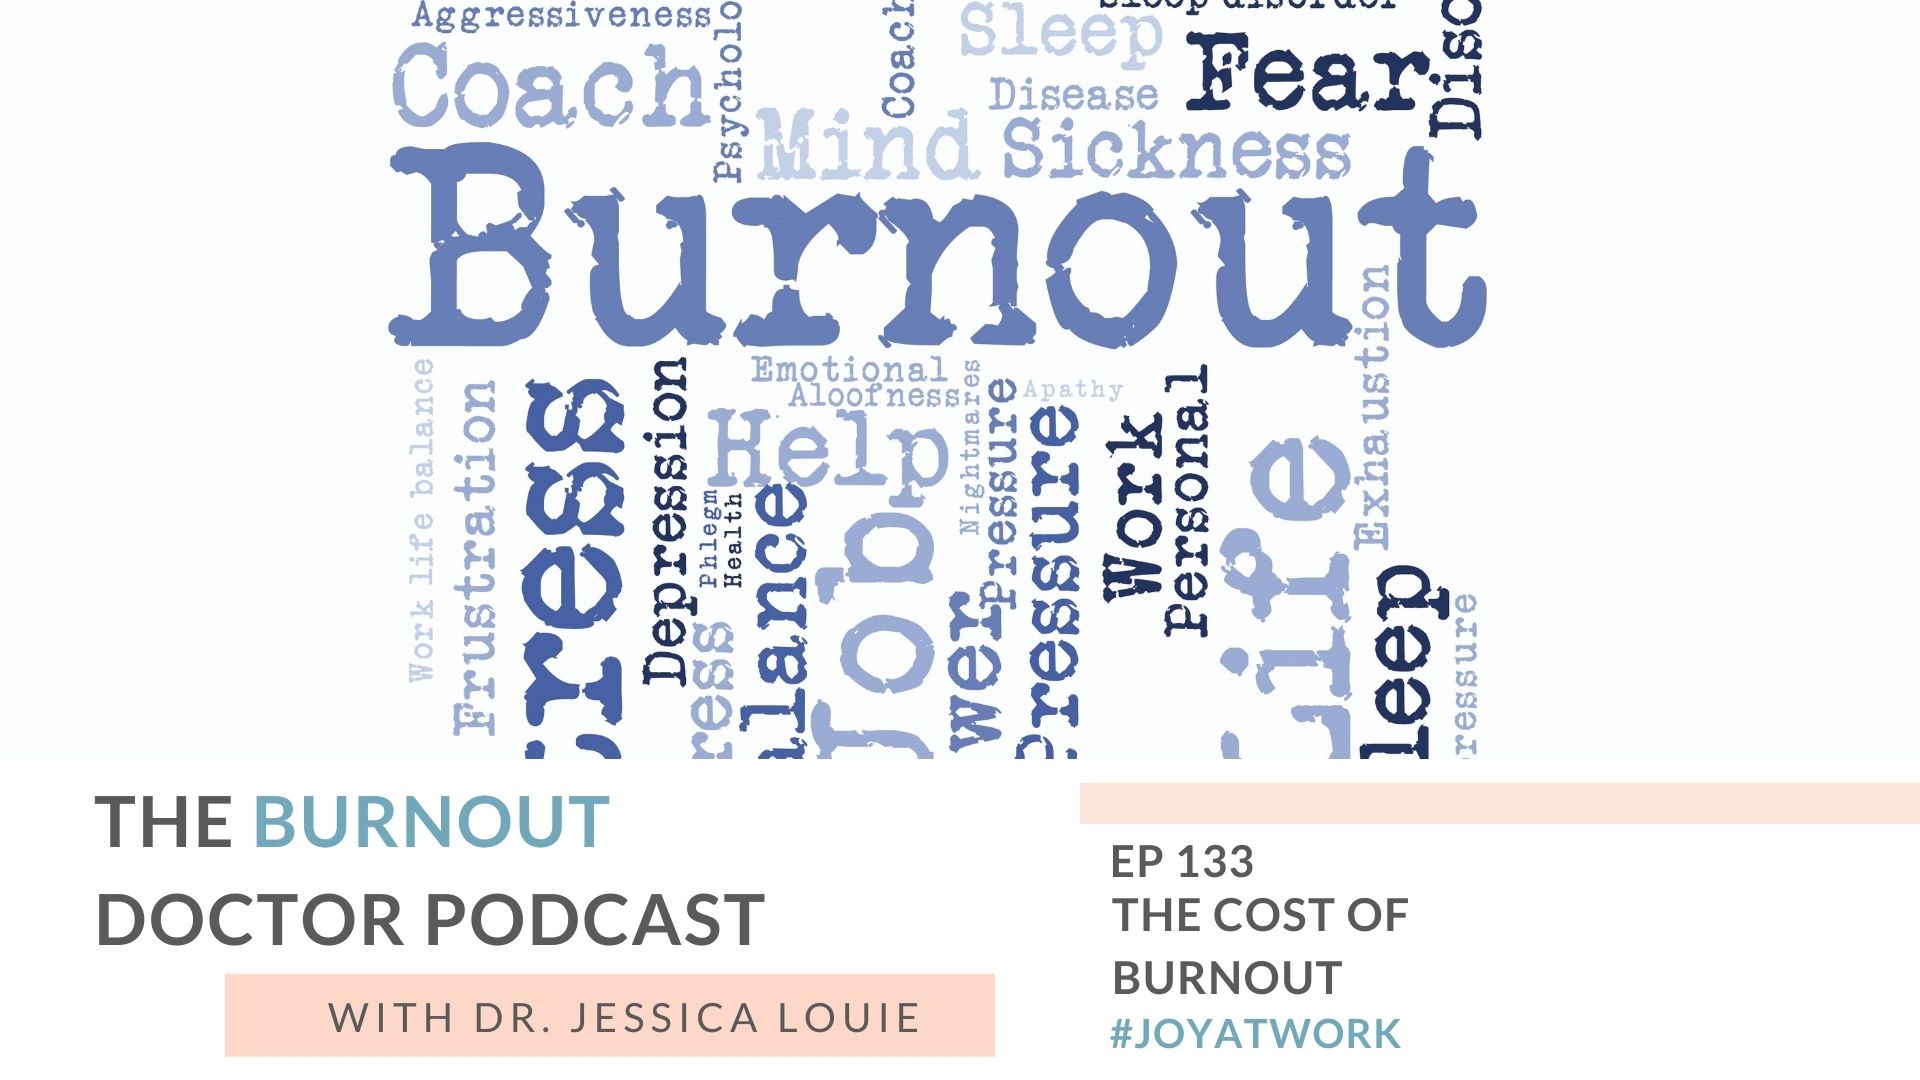 The cost of burnout. The true cost of burnout. How burnout costs money and debt. The Burnout Doctor Podcast with Dr. Jessica Louie. Keynote speaker on burnout, clutter, KonMari, simplifying.